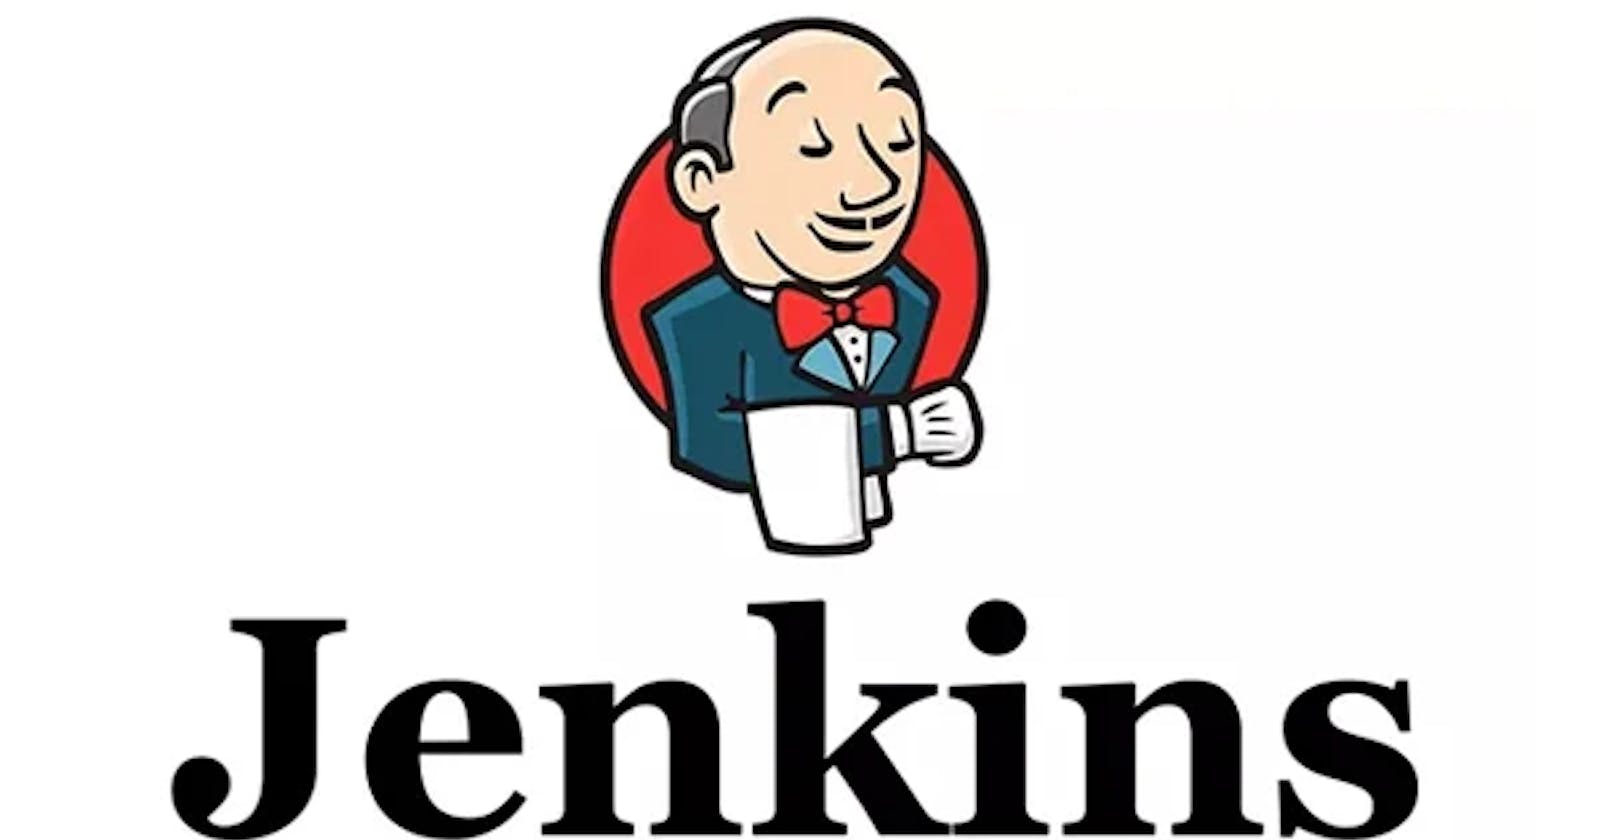 Getting Started with Jenkins: Installation and Setup Guide